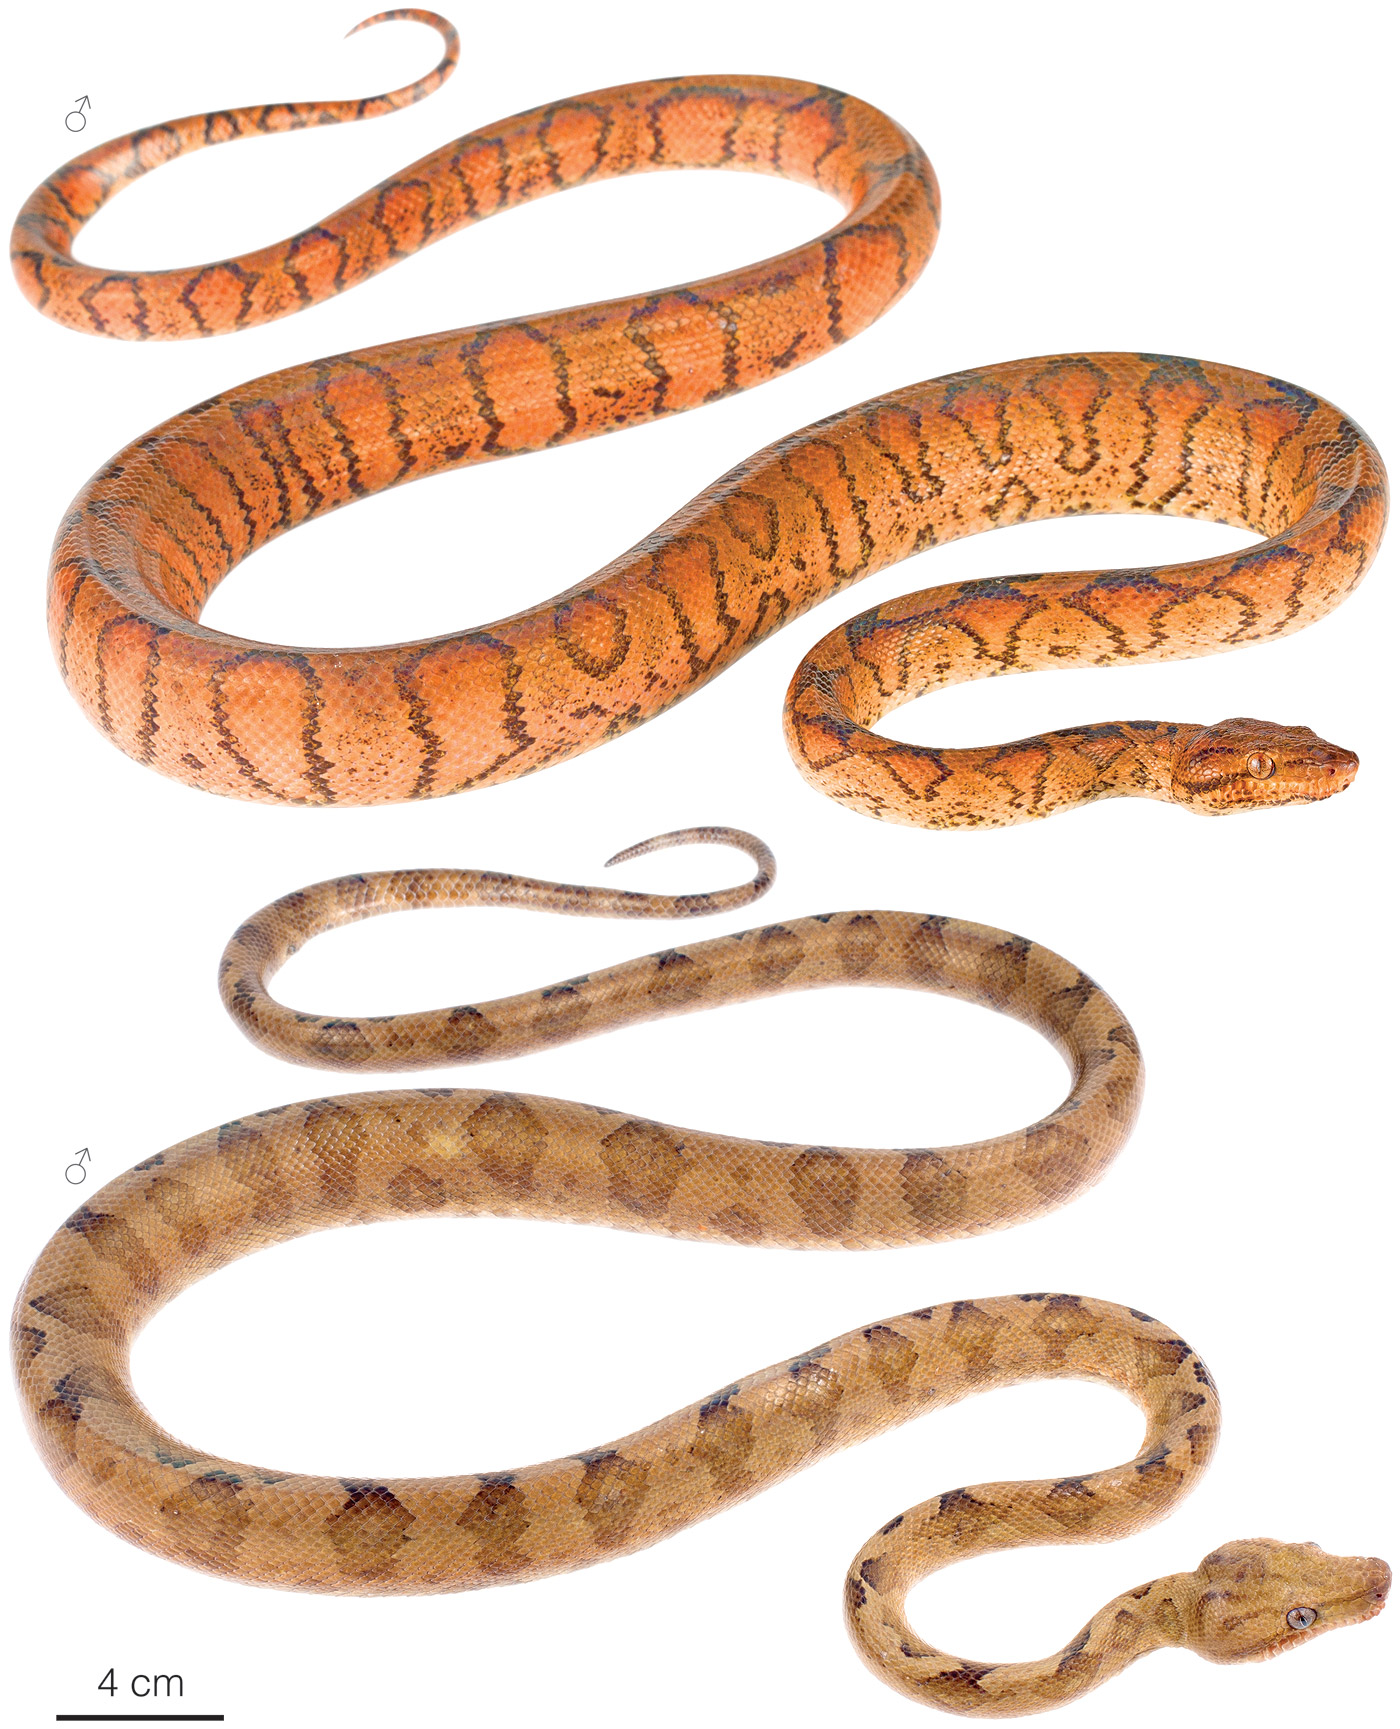 Figure showing variation among individuals of Corallus blombergi